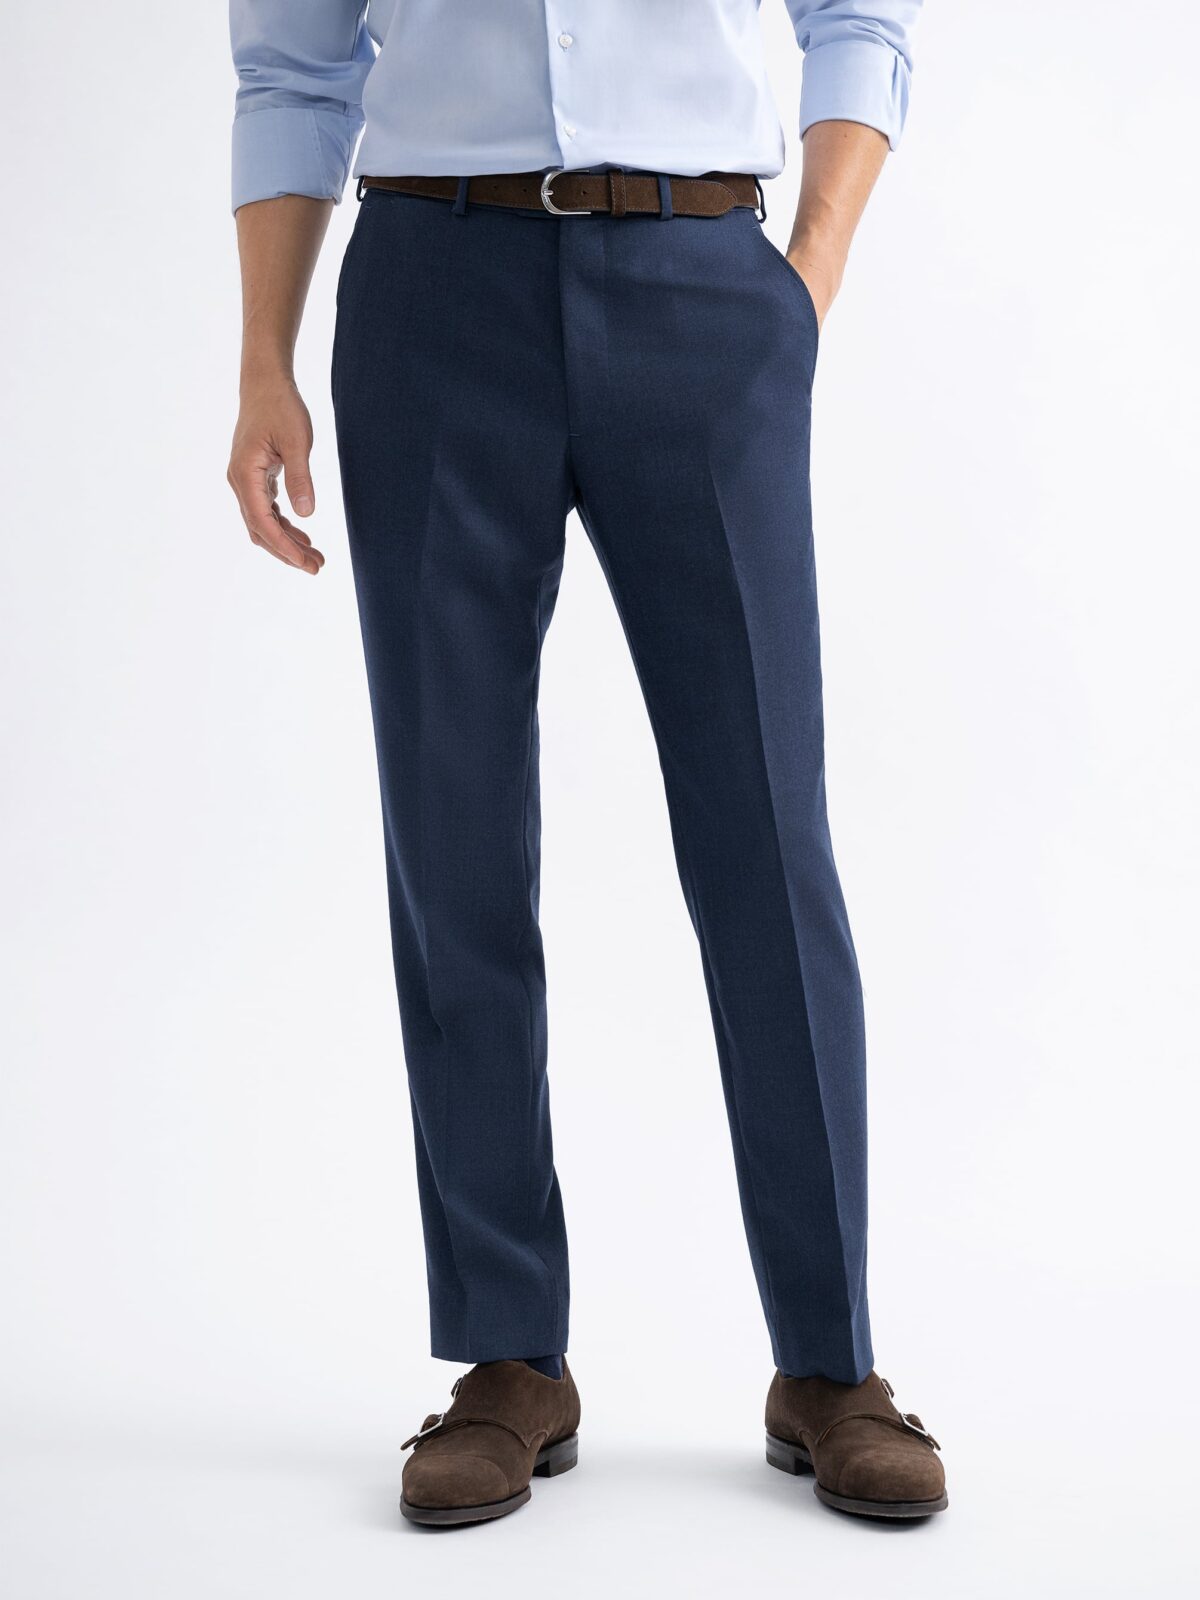 Shop Trendy Mens Trousers Online at Citymall